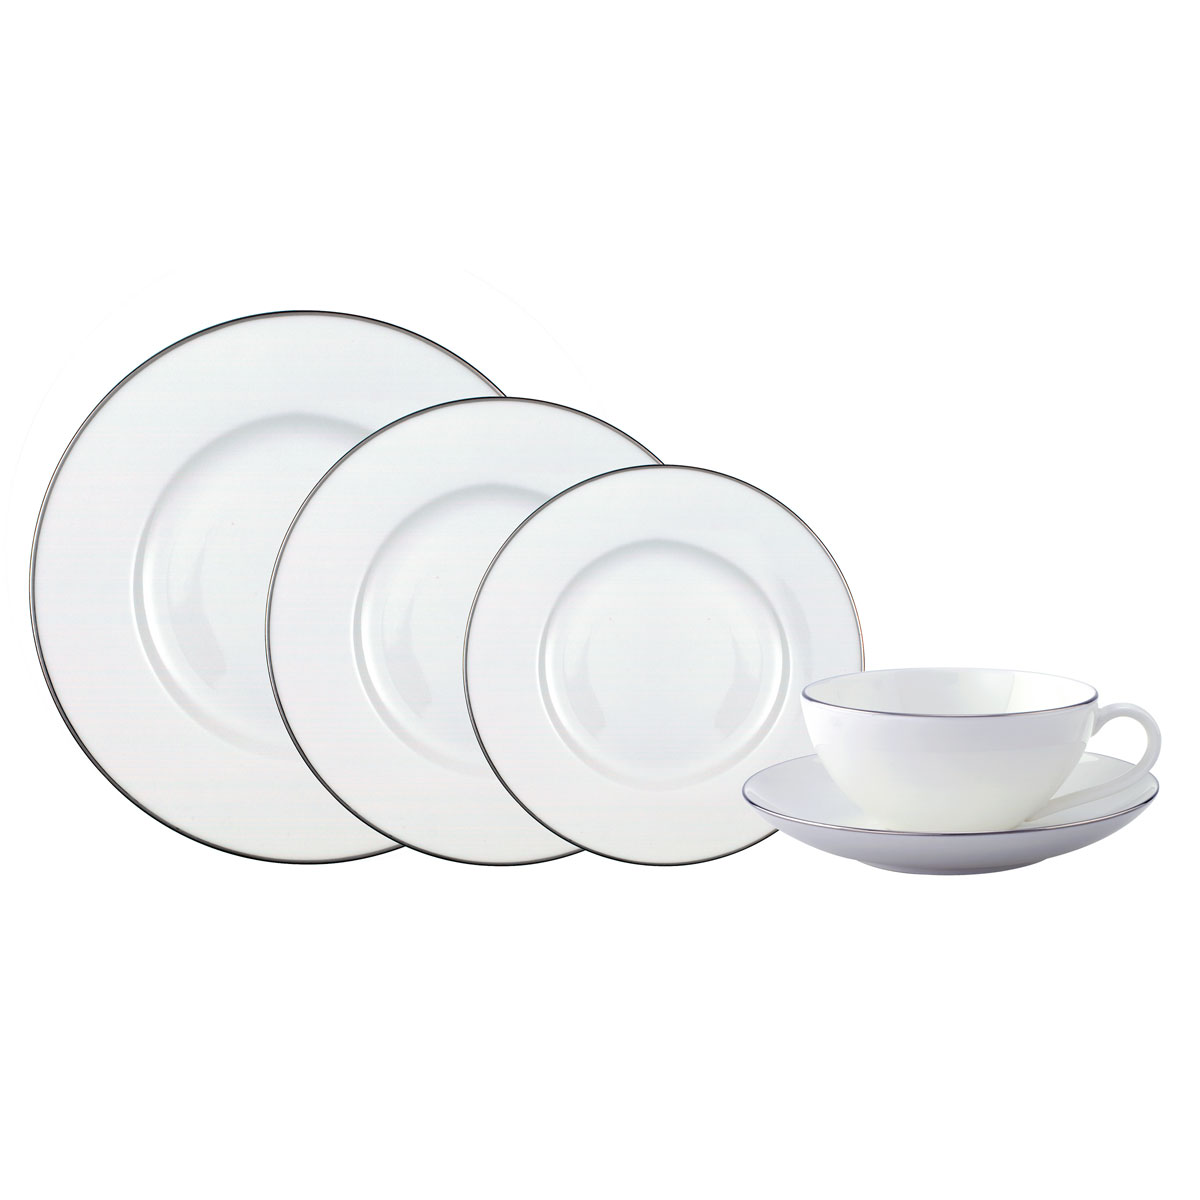 Villeroy and Boch Anmut Platinum 5 Piece Place Setting